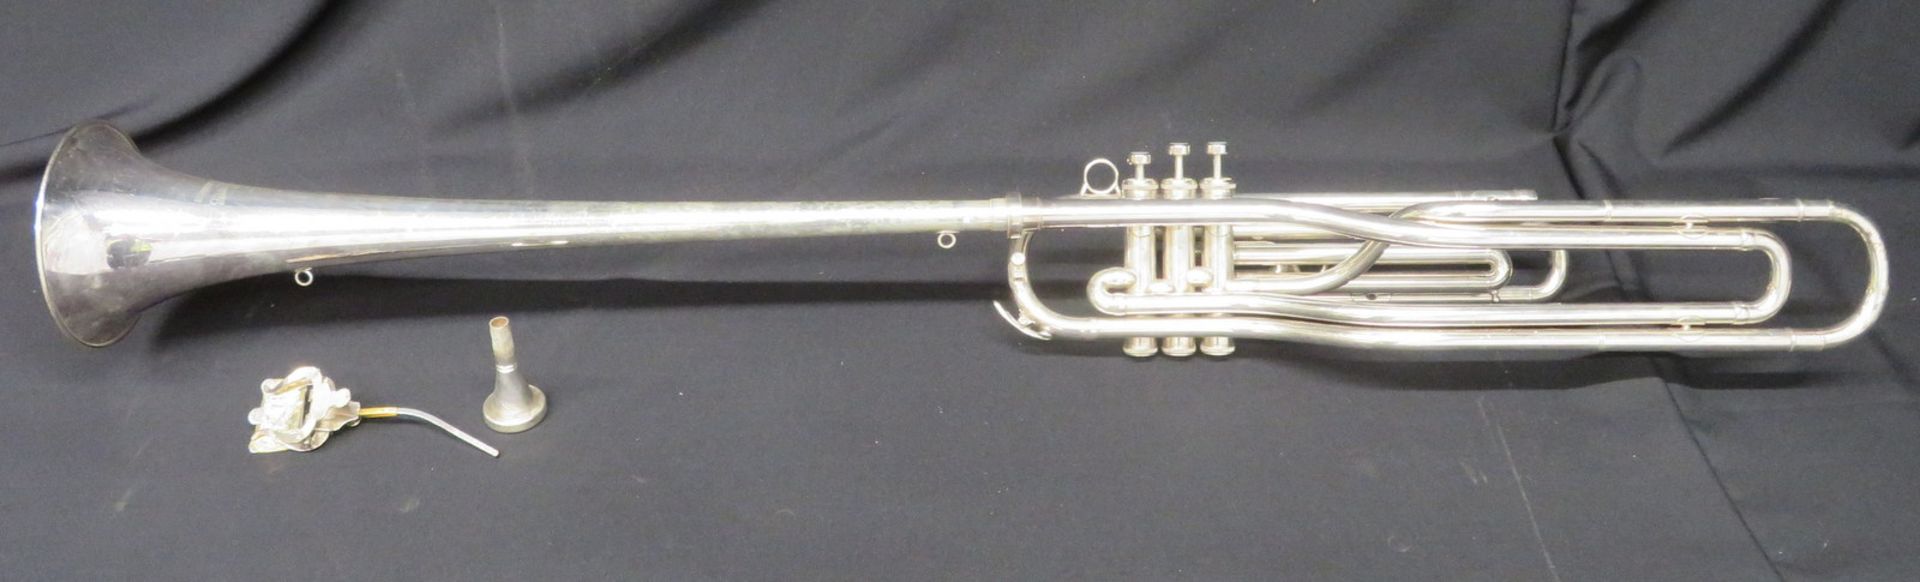 Boosey & Hawkes Imperial Besson bass fanfare trumpet with case. Serial number: 708-670089. - Image 3 of 18